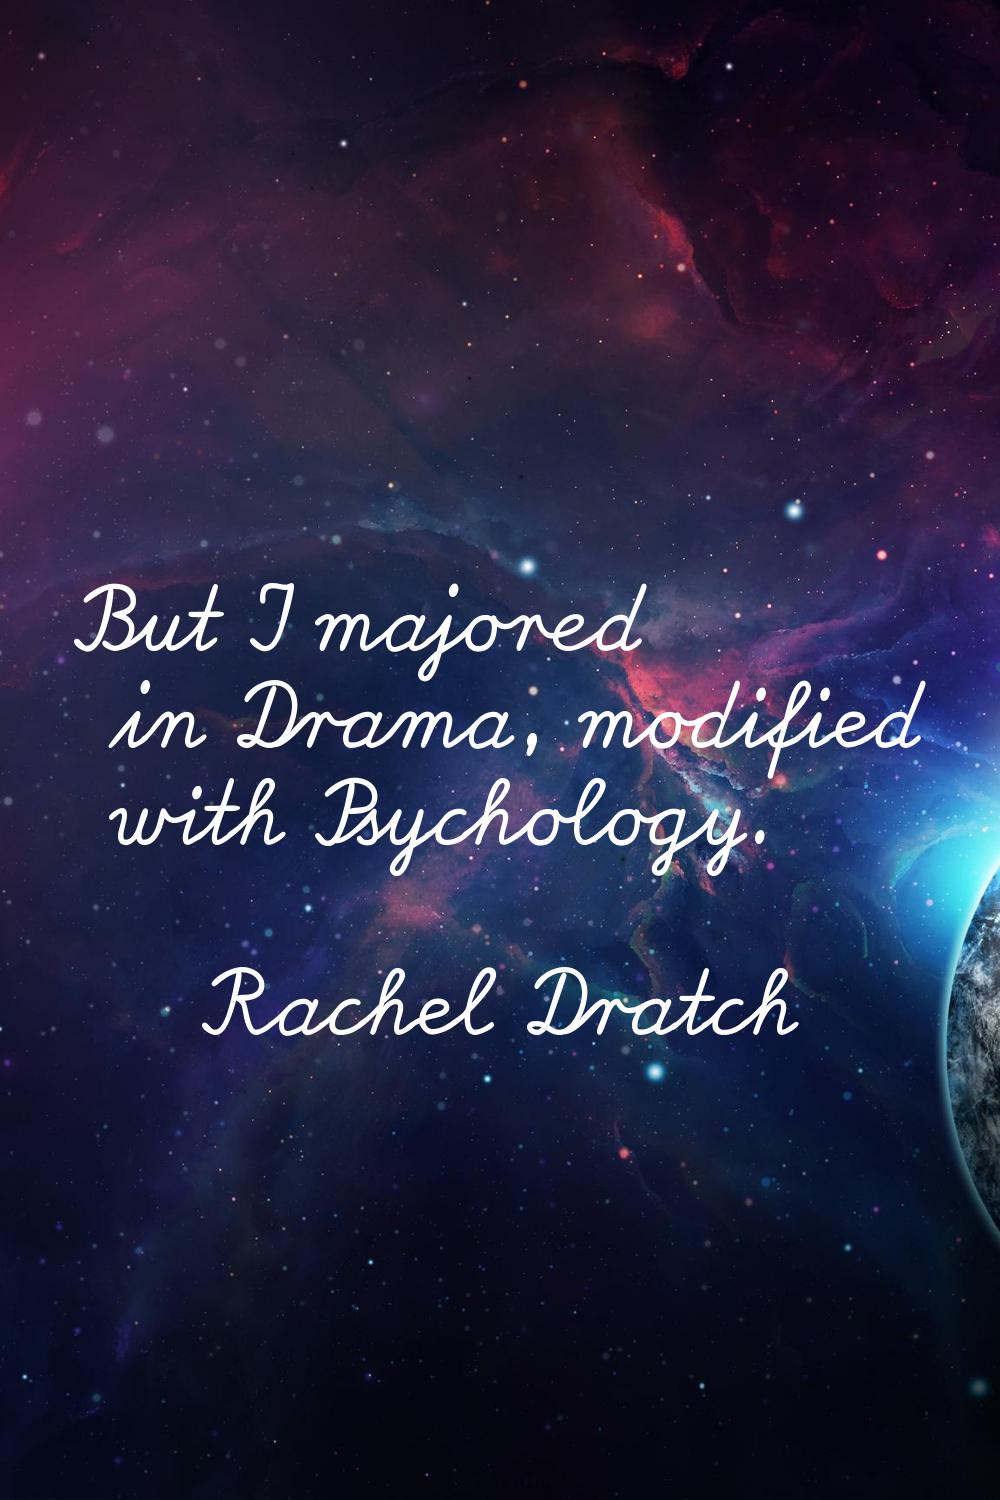 But I majored in Drama, modified with Psychology.